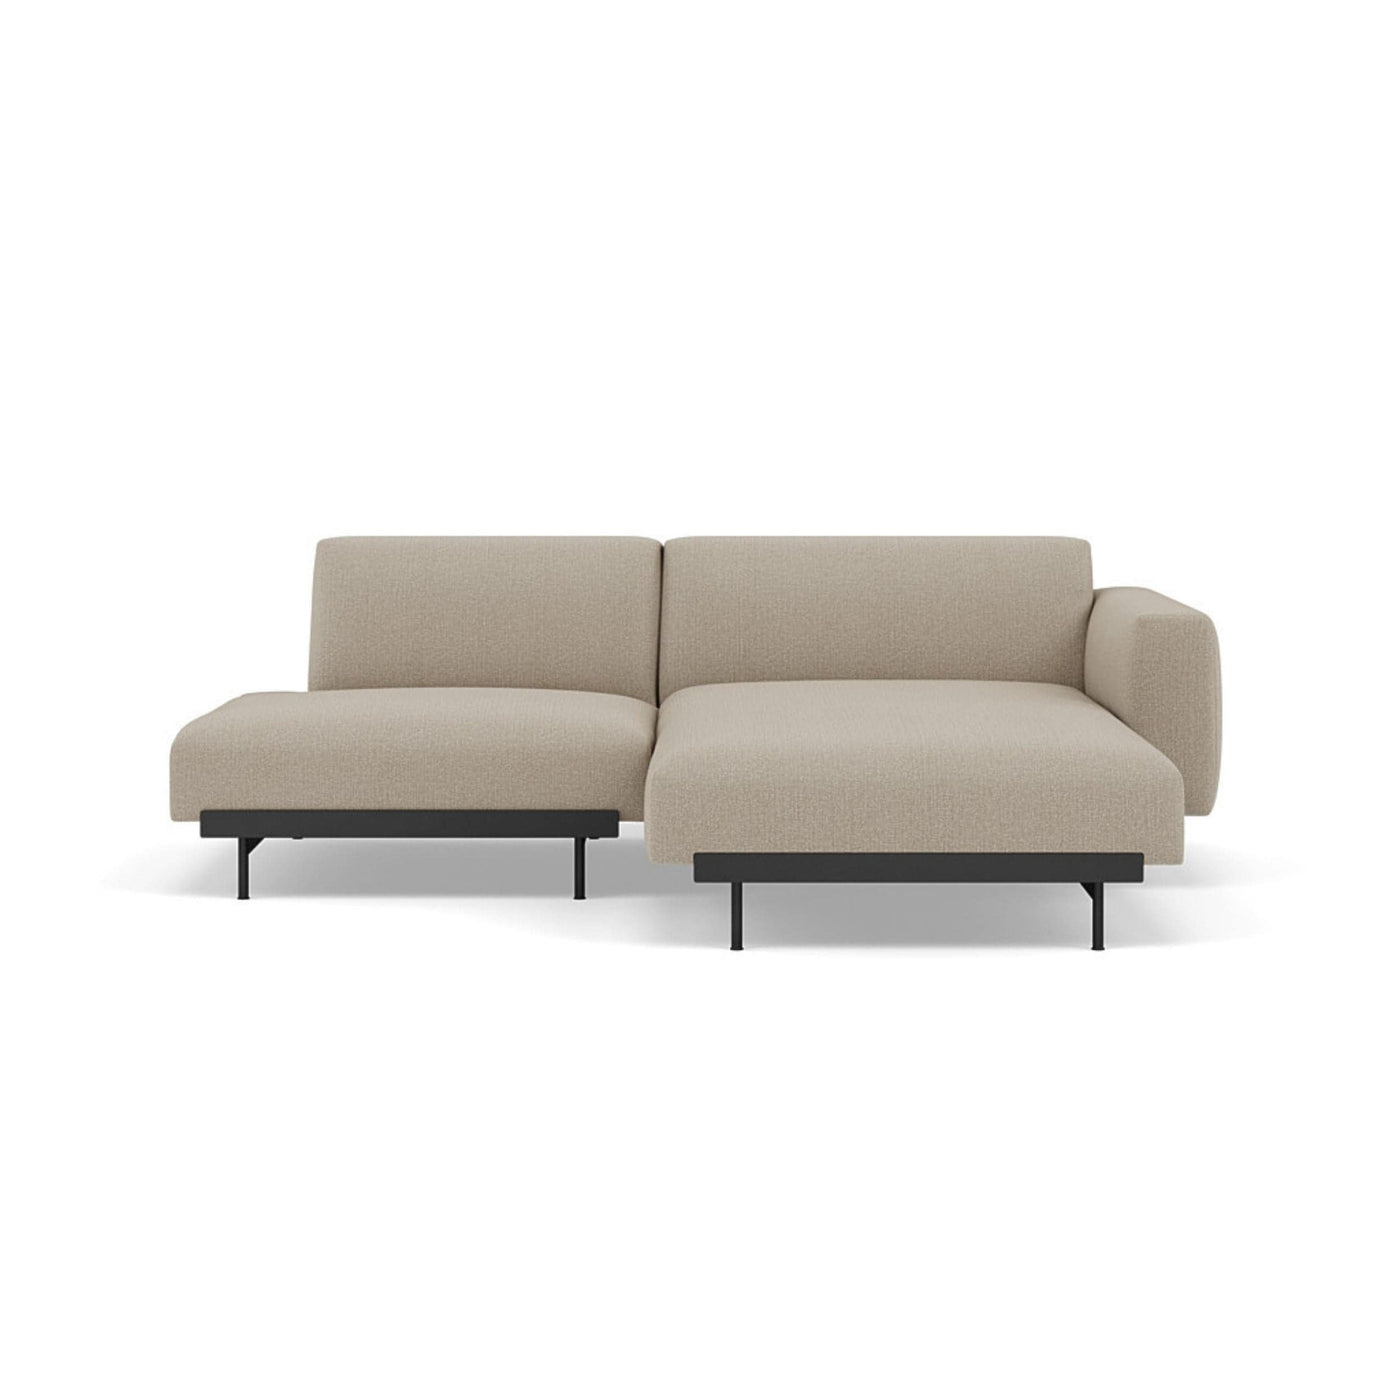 Muuto In Situ Modular 2 Seater Sofa, configuration 7. Made to order from someday designs #colour_clay-10